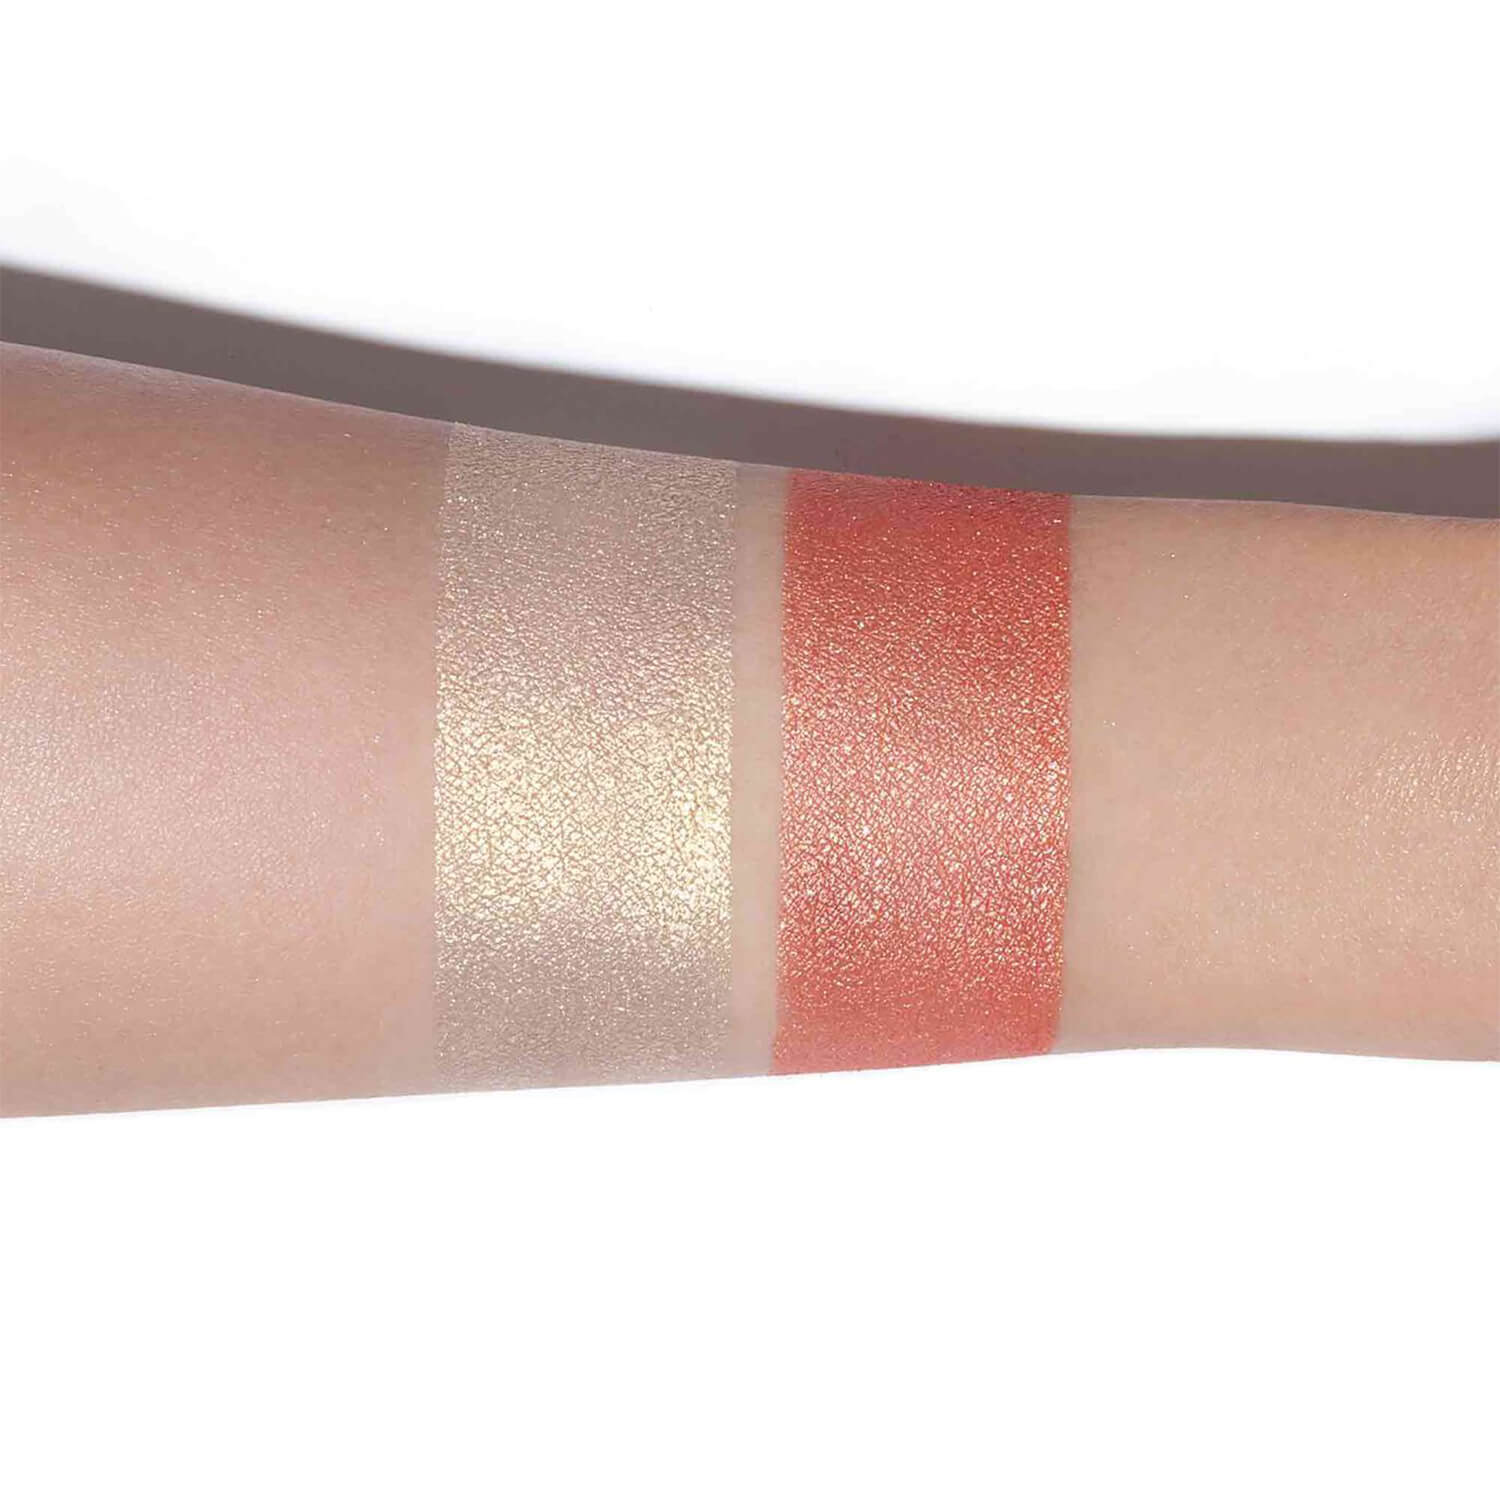 swatch of Anastasia loose highlighter available at Heygirl.pk for delivery in Pakistan